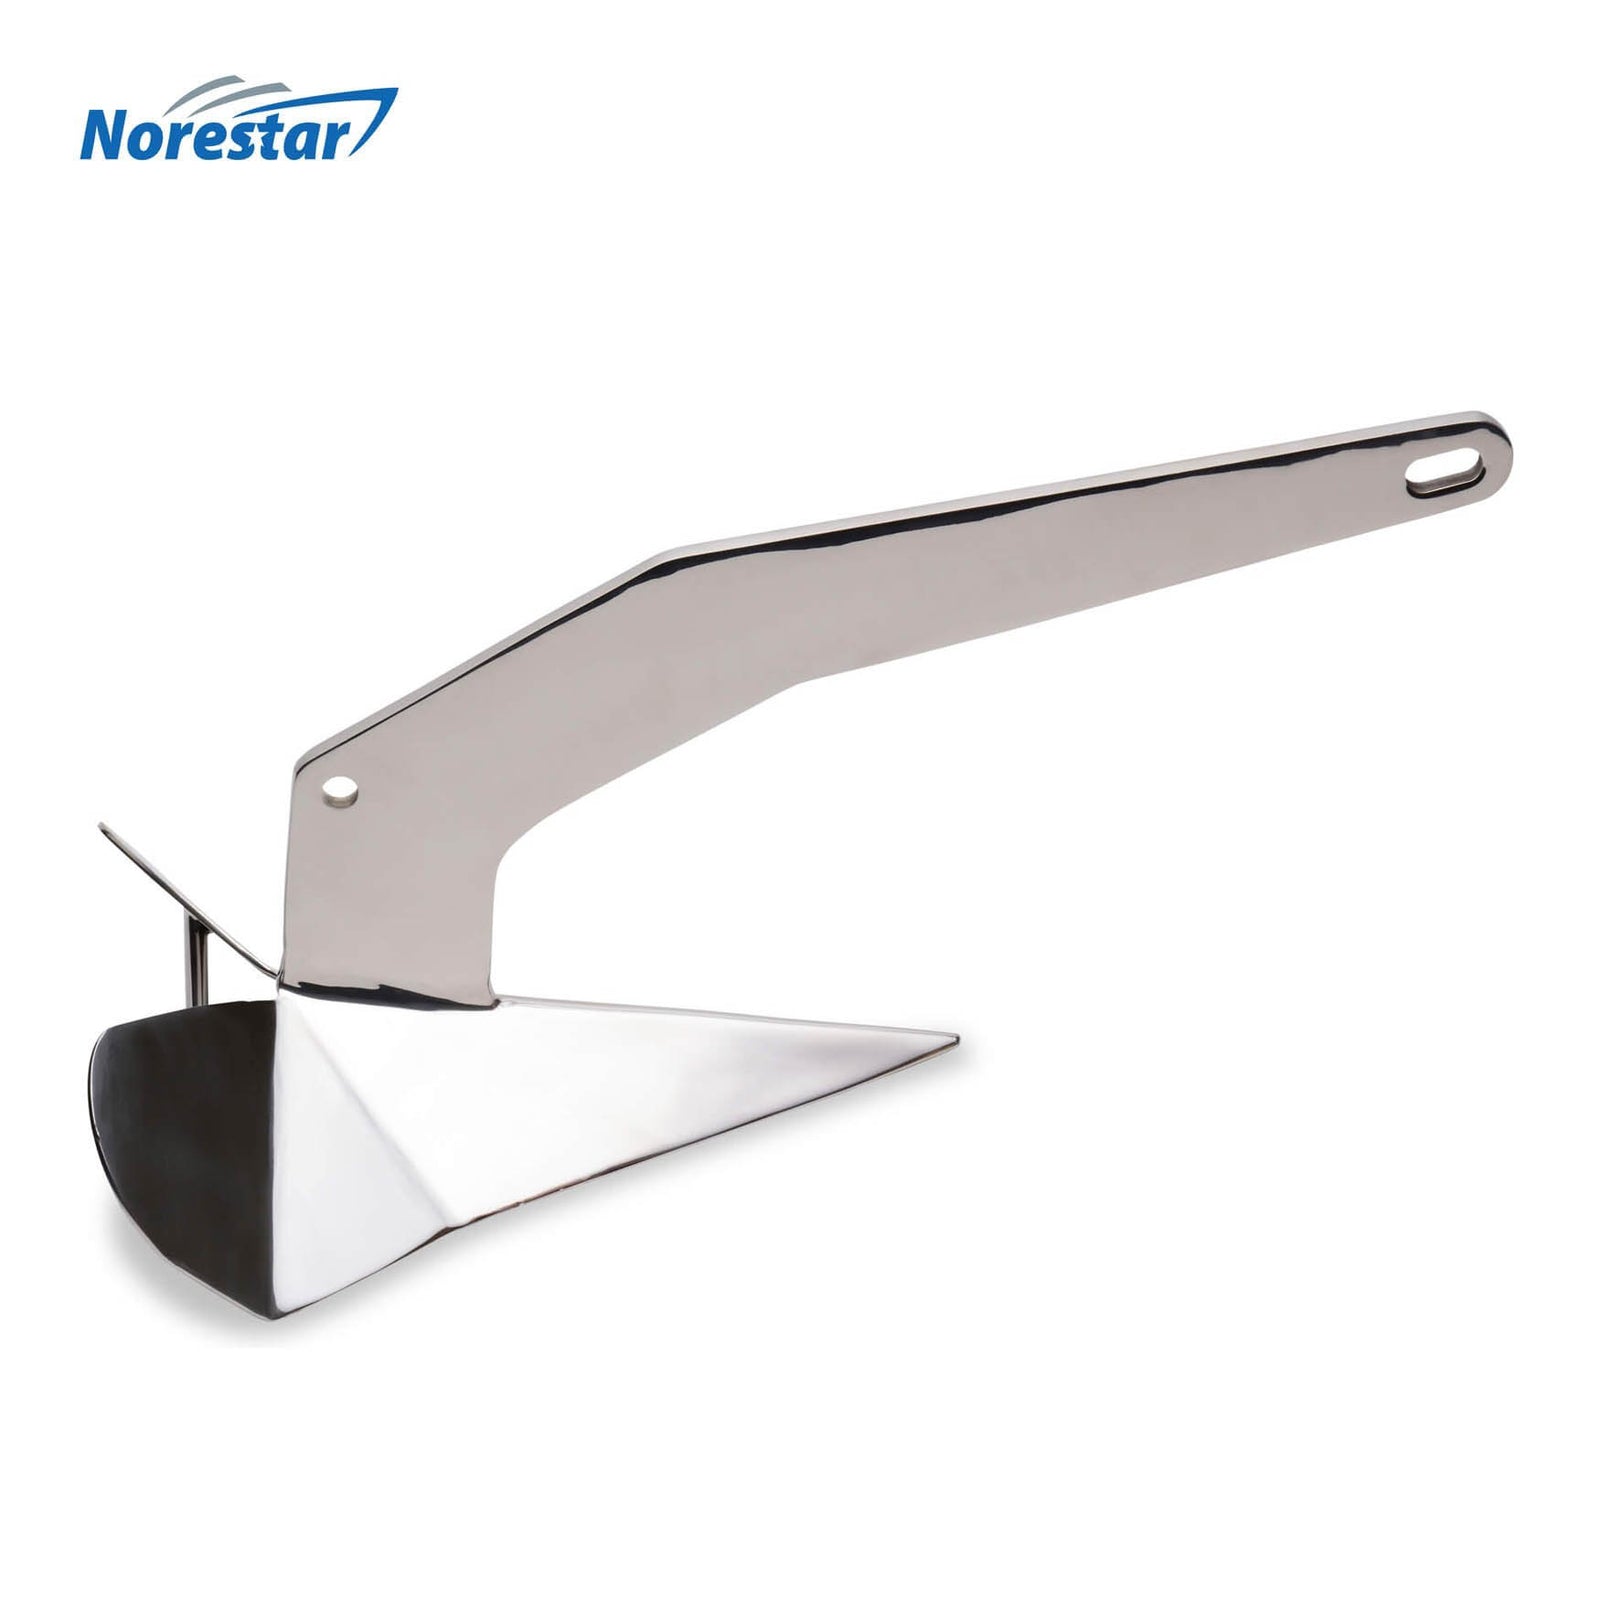 Norestar Stainless Steel Wing/Delta Boat Anchor –